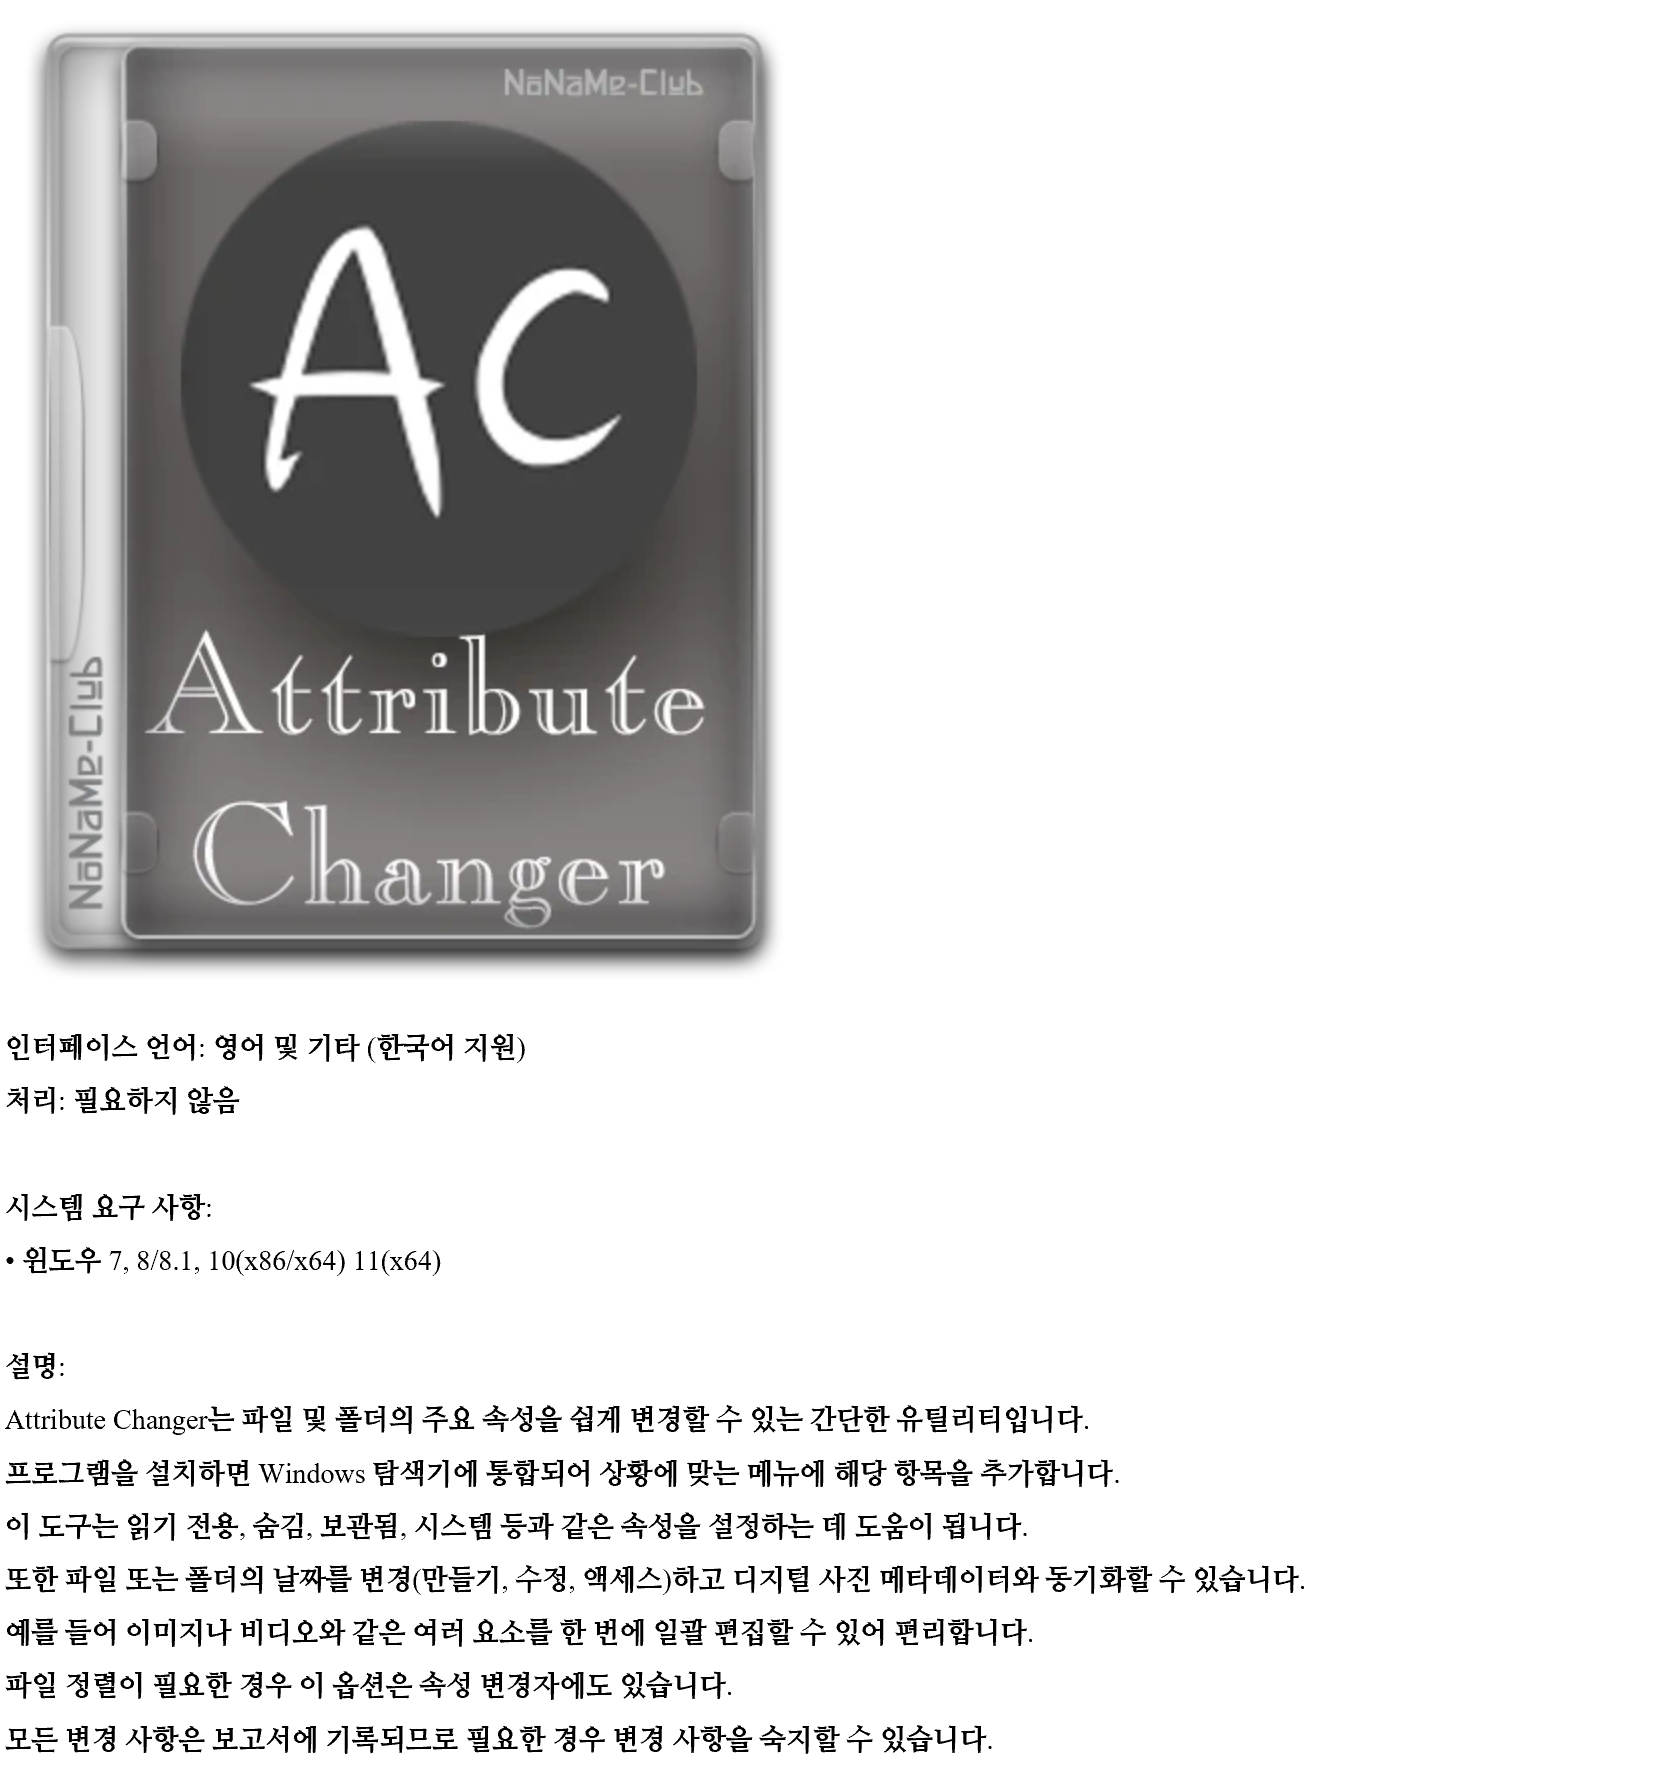 for windows download Attribute Changer 11.20b